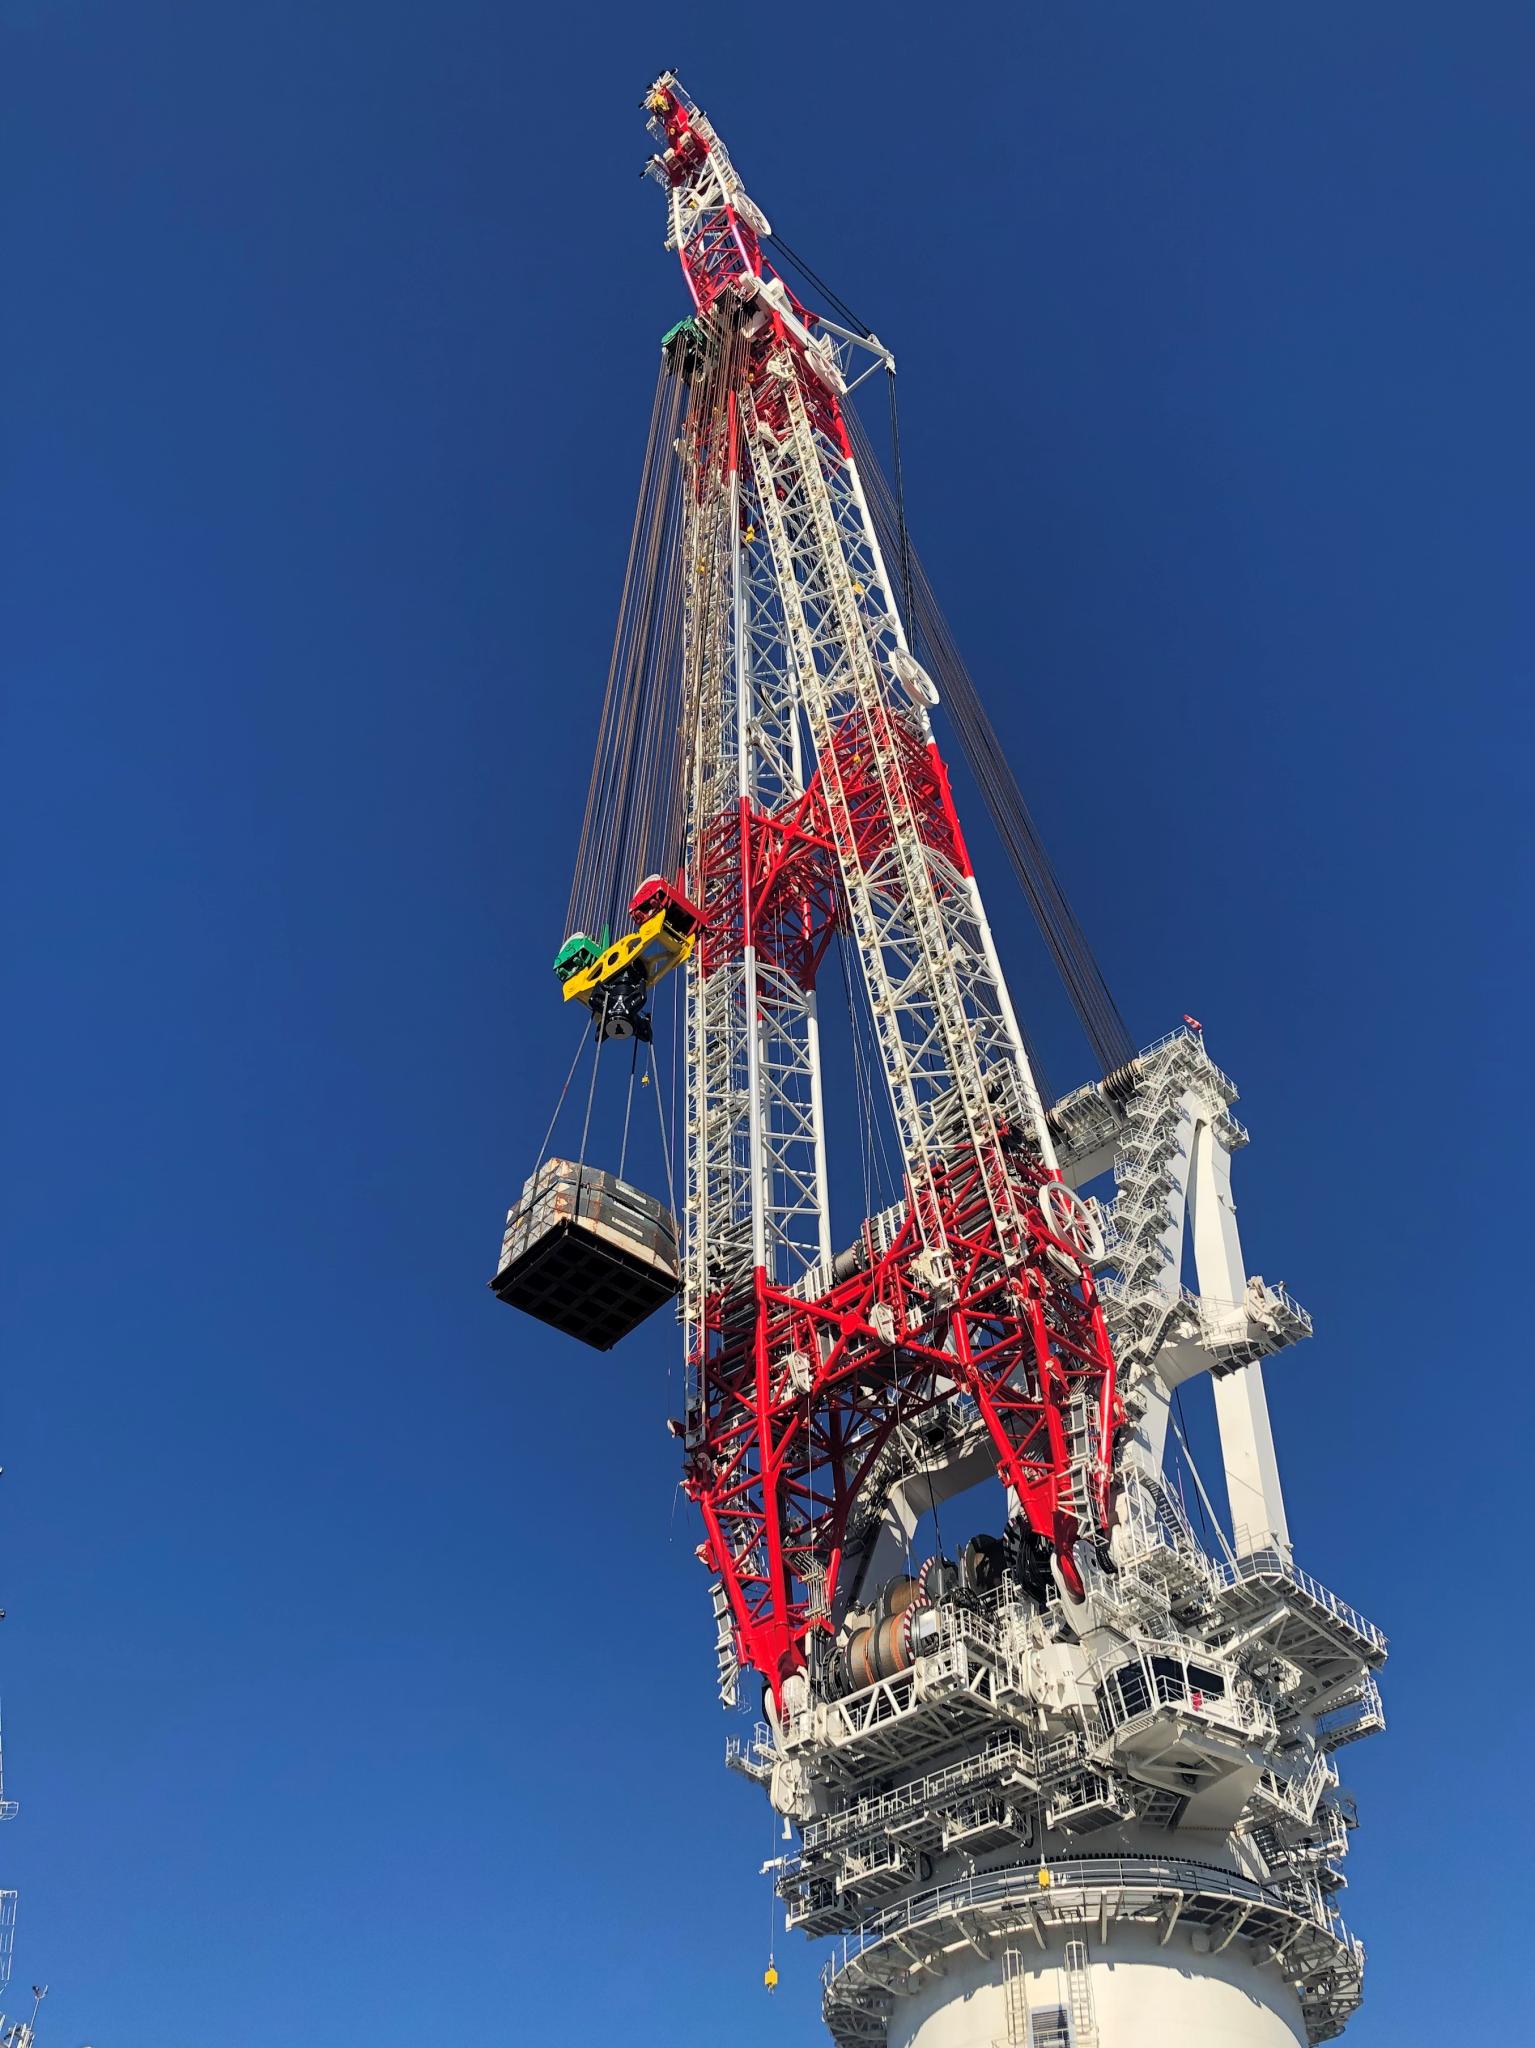 A photo of Liebherr crane onboard the Orion vessel